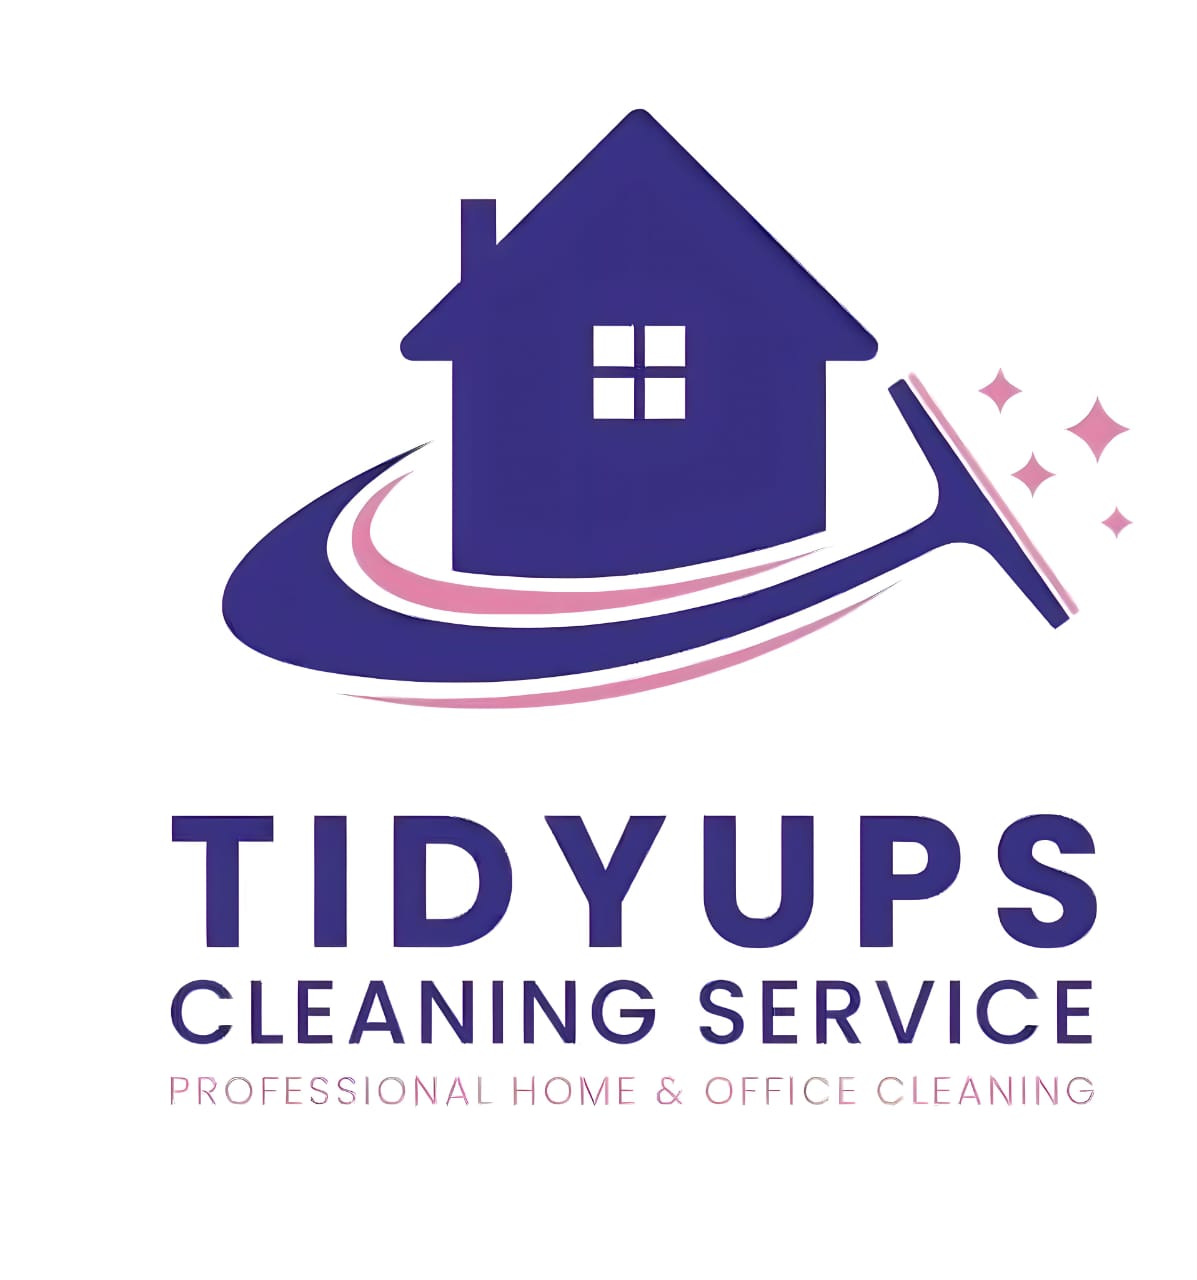 Tidyups Cleaning Service Inc